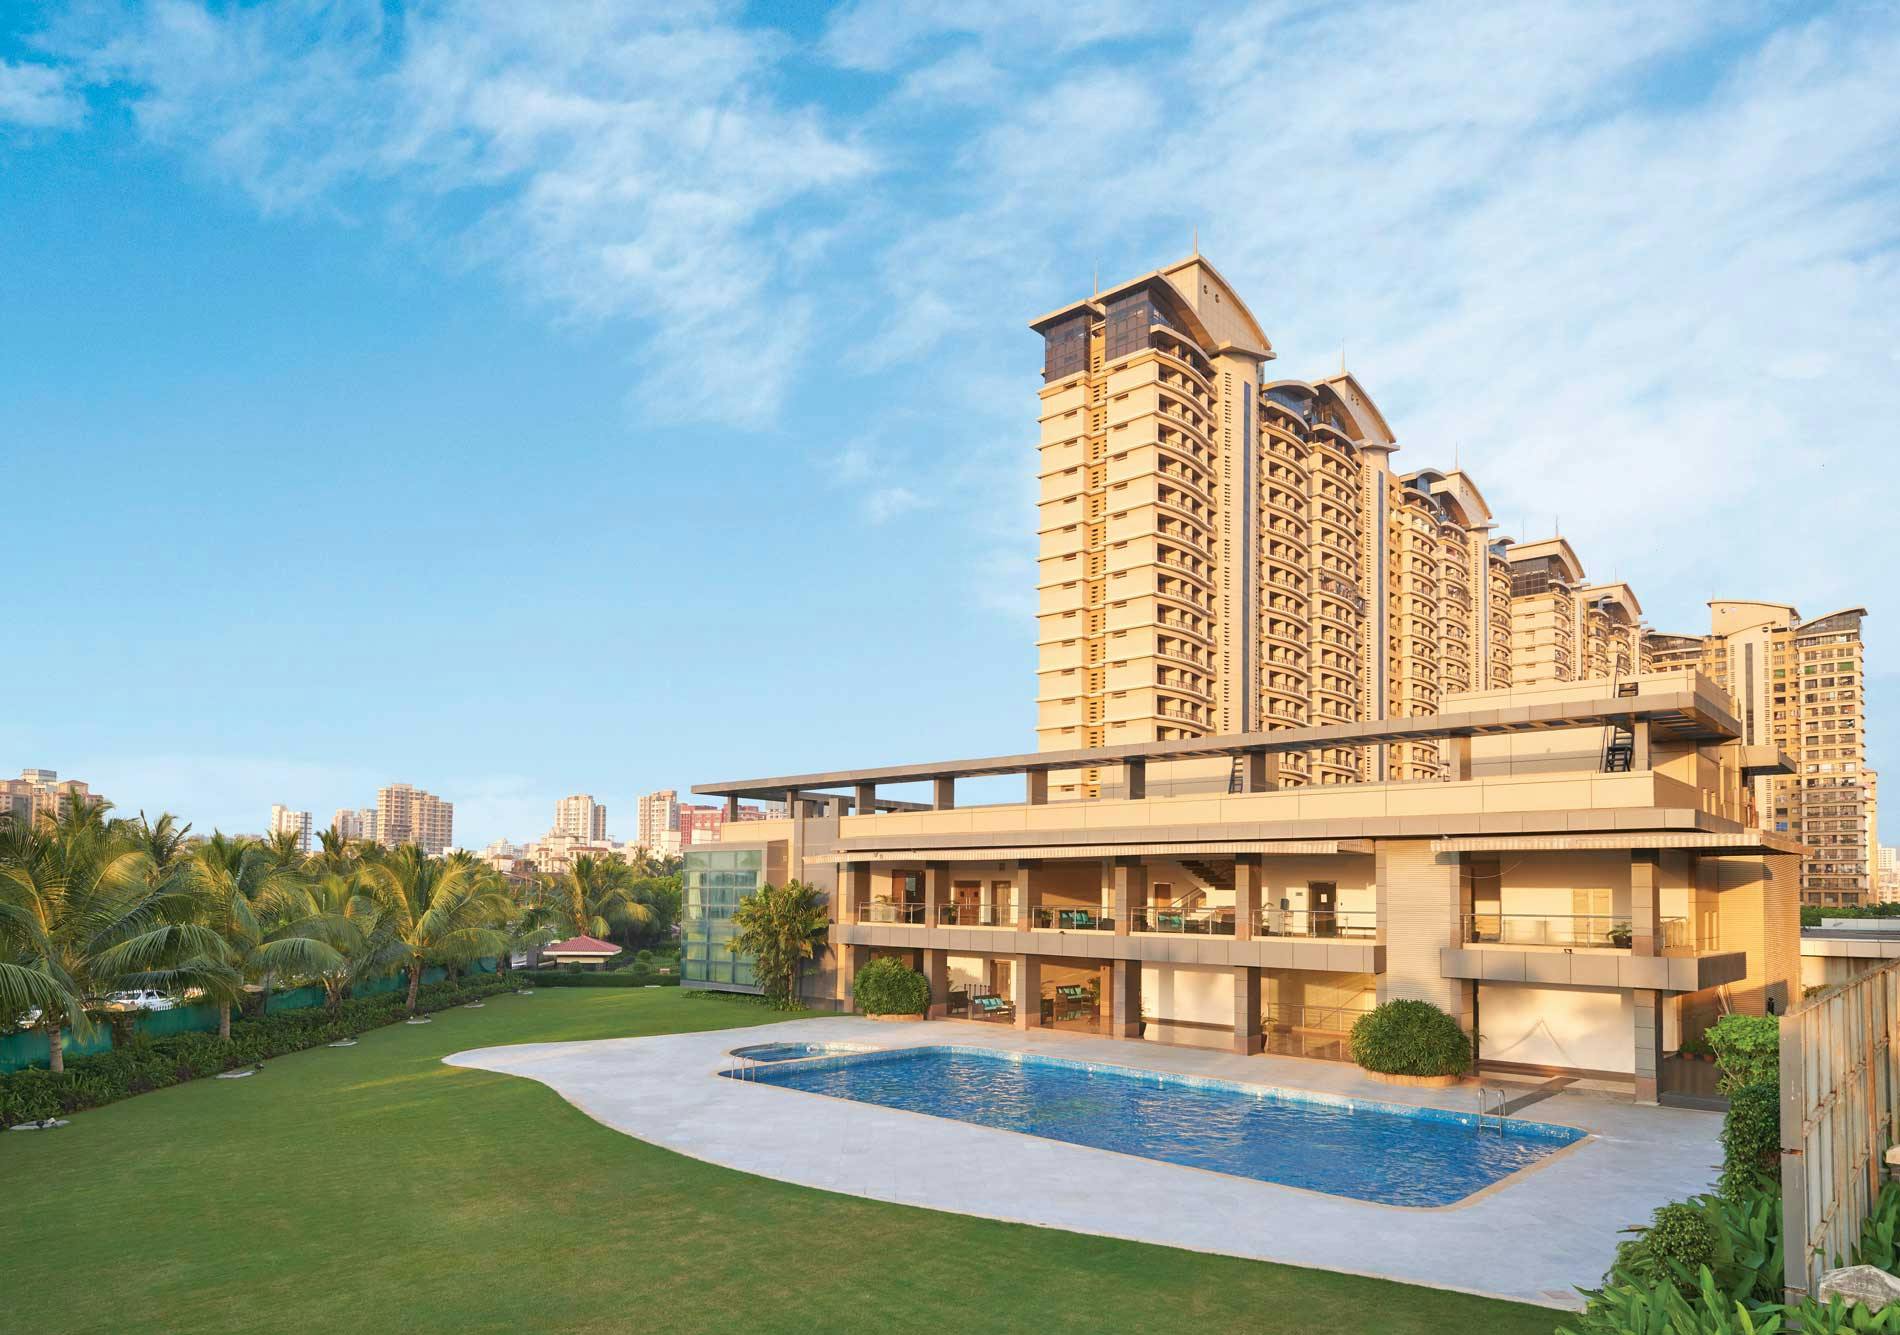 Raheja Interface Heights, Malad West: A perfect location for residential apartments